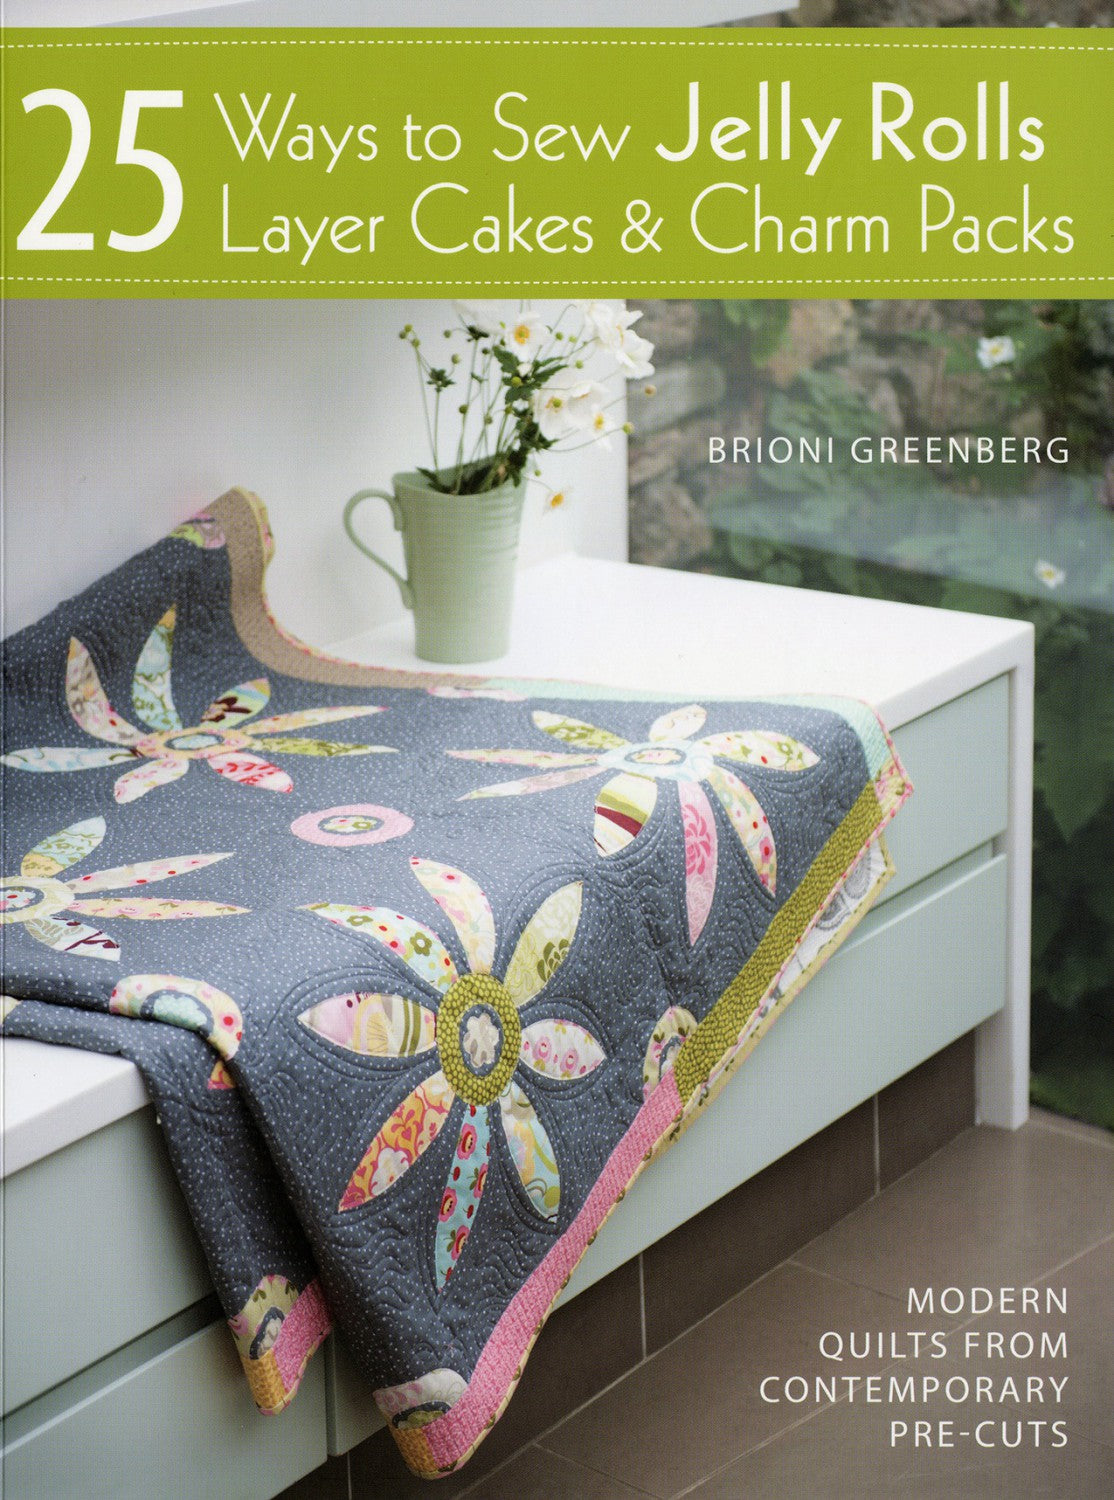 25 Ways to Sew Jelly Rolls, Layer Cakes & Charm Packs - Softcover Book